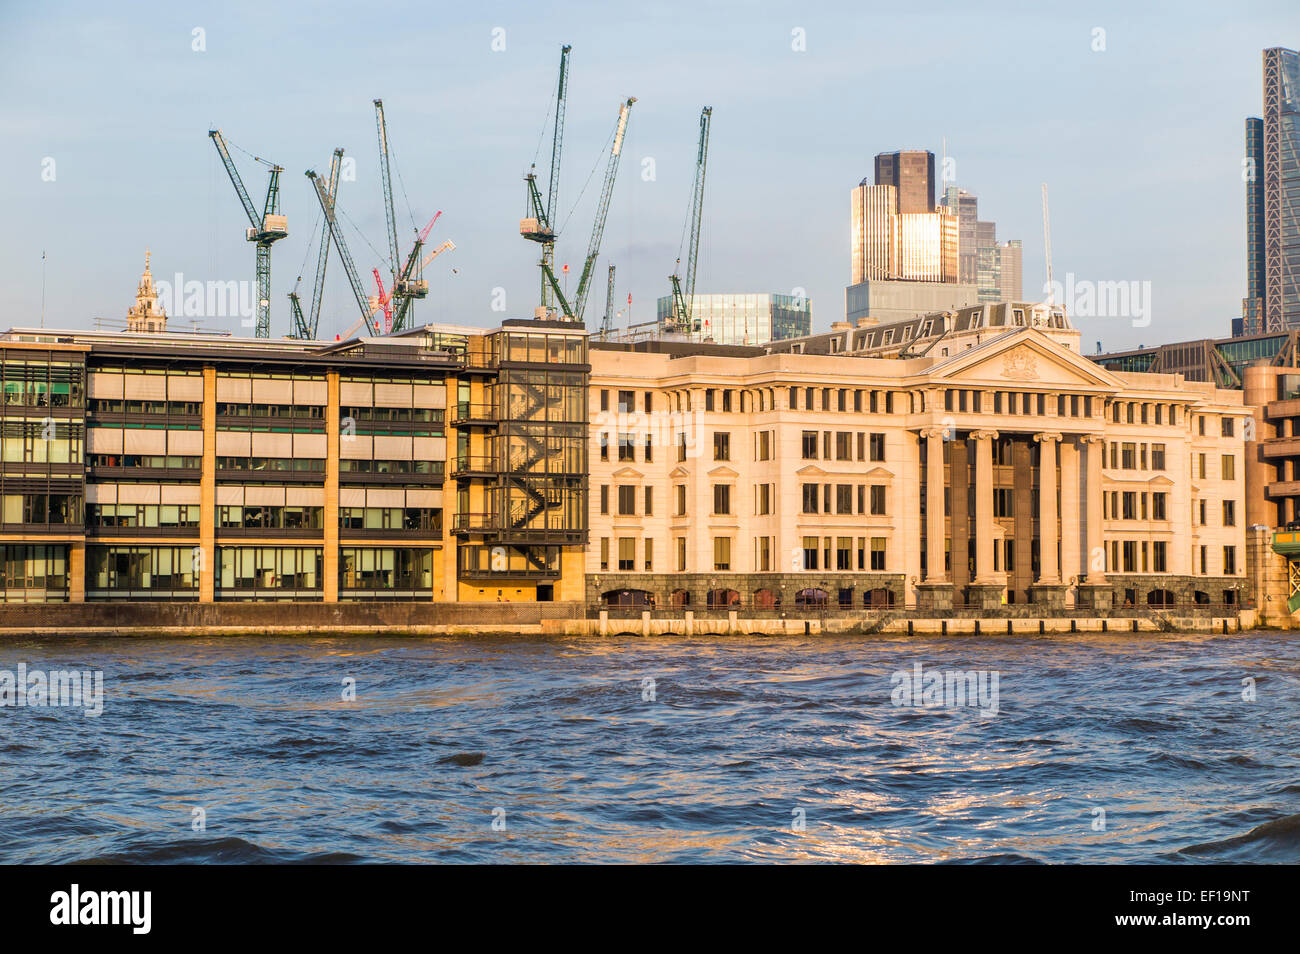 View of Stanhope tower cranes on the London skyline on the Bloomberg Place development site, City of London, EC4, Vintners Place and River Thames Stock Photo